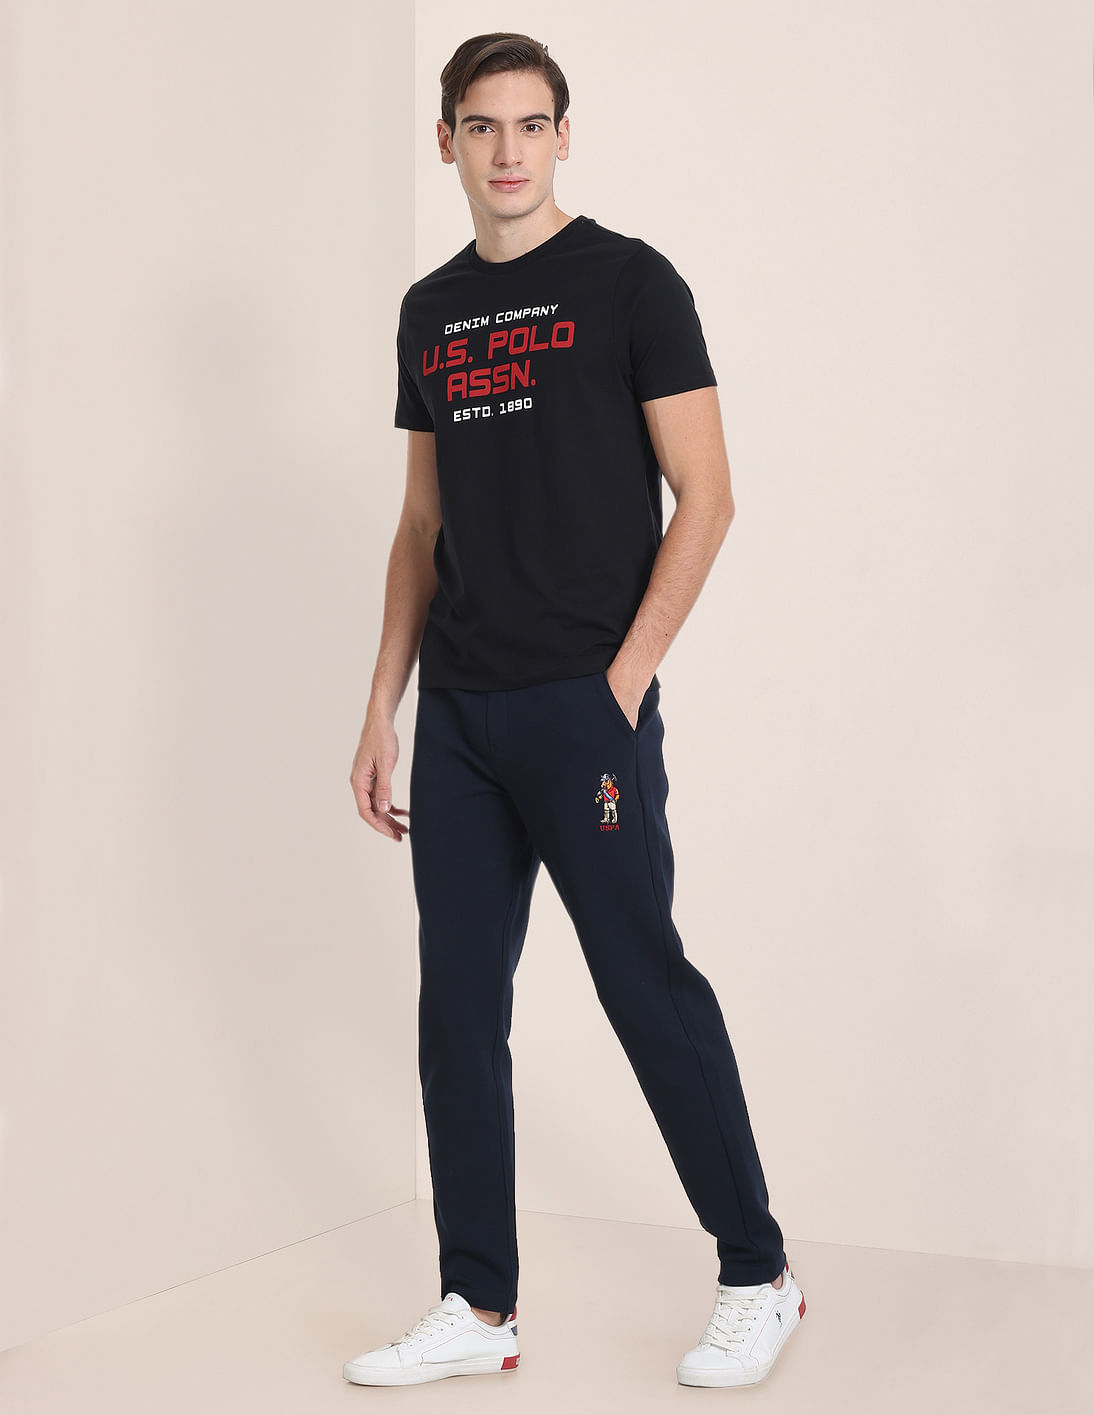 U S Polo Assn Grey Track Pant #I672 at Rs 899.00, Track Pant